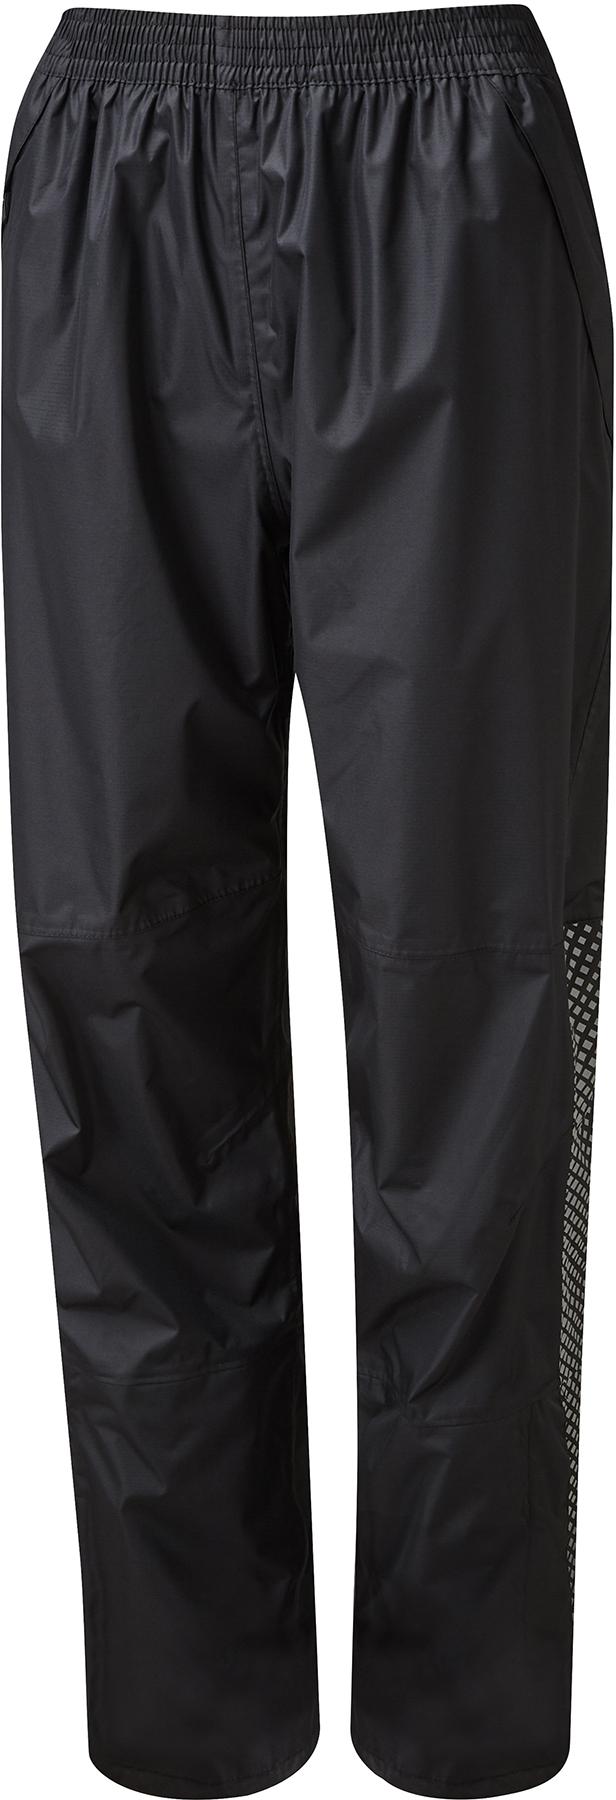 Altura Nightvision Womens Overtrouser - Black